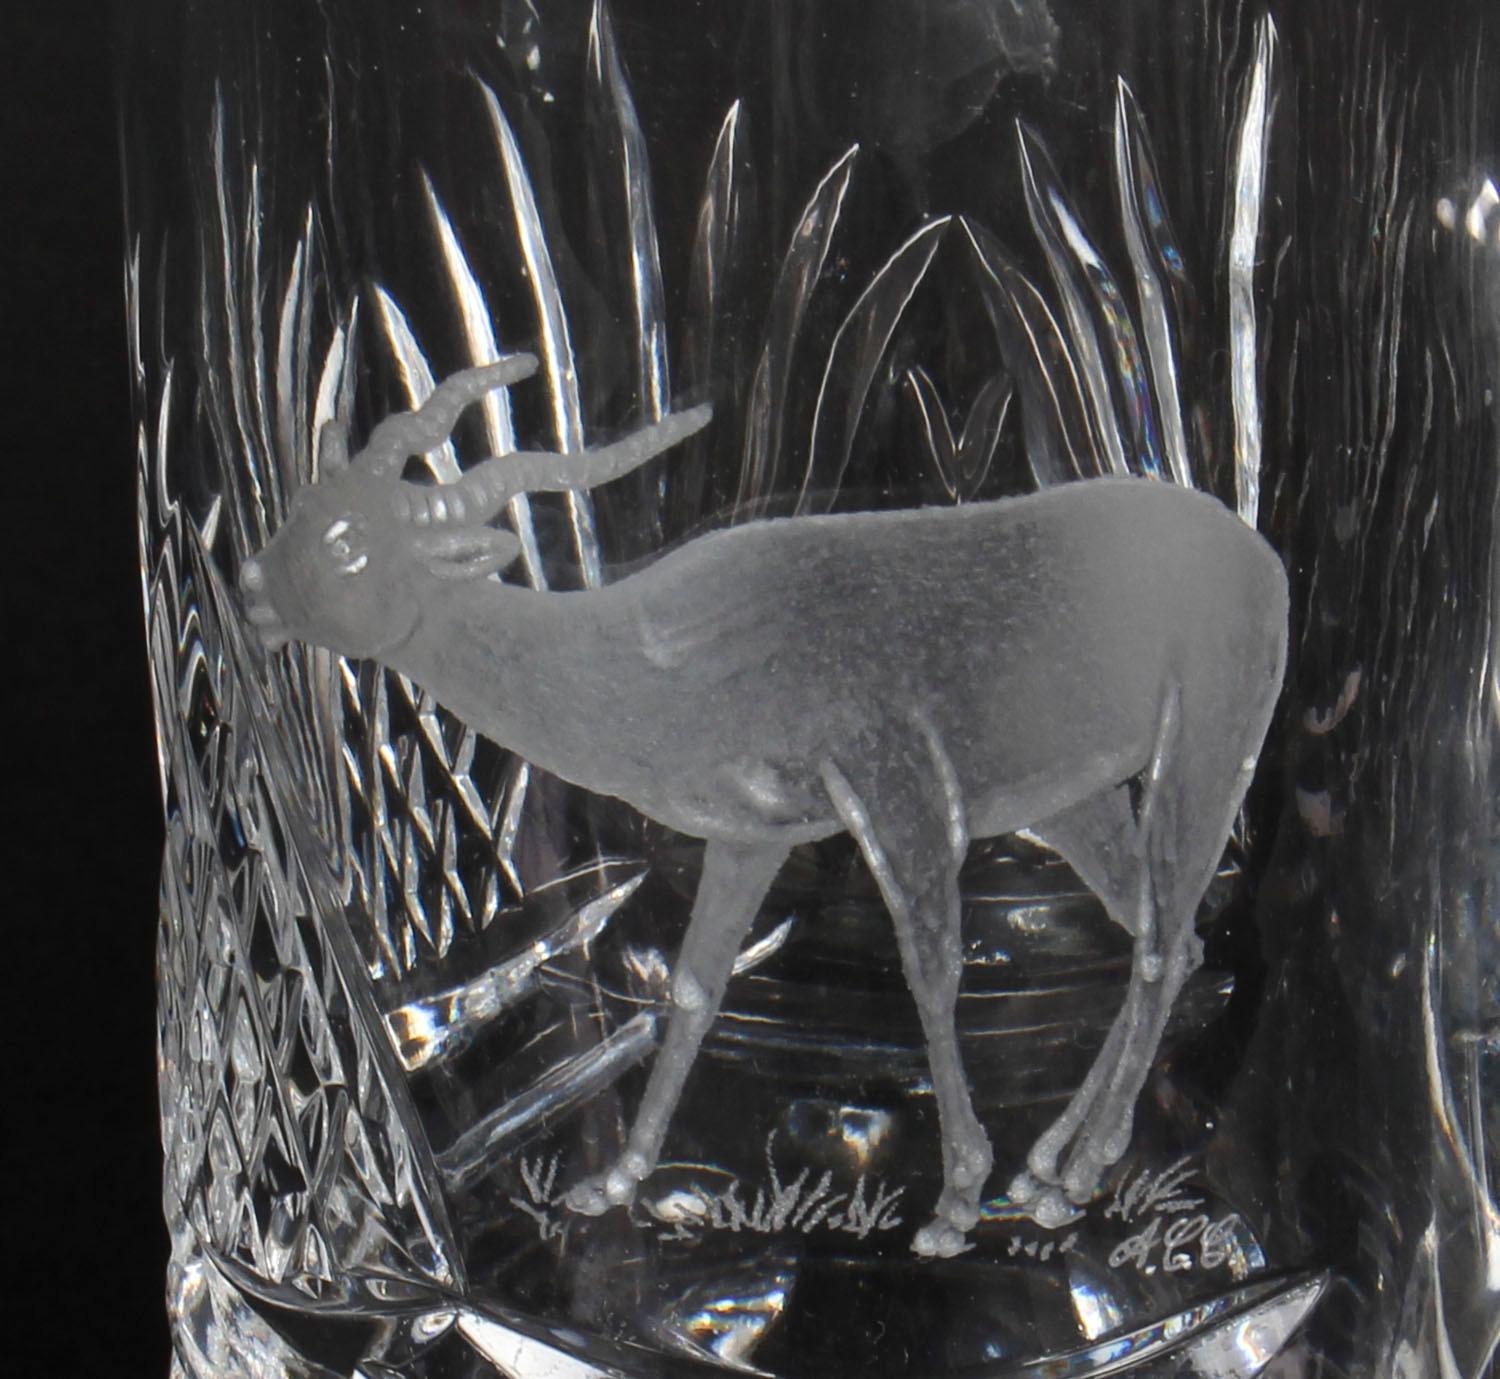 This is a splendid vintage engraved cut glass tankard, signed A.C.C and dating from the mid- 20th century.

This gorgeous tankard has a lovely engraved stag to the centre and distinctive cut glass geometrical motifs that resemble the concept of